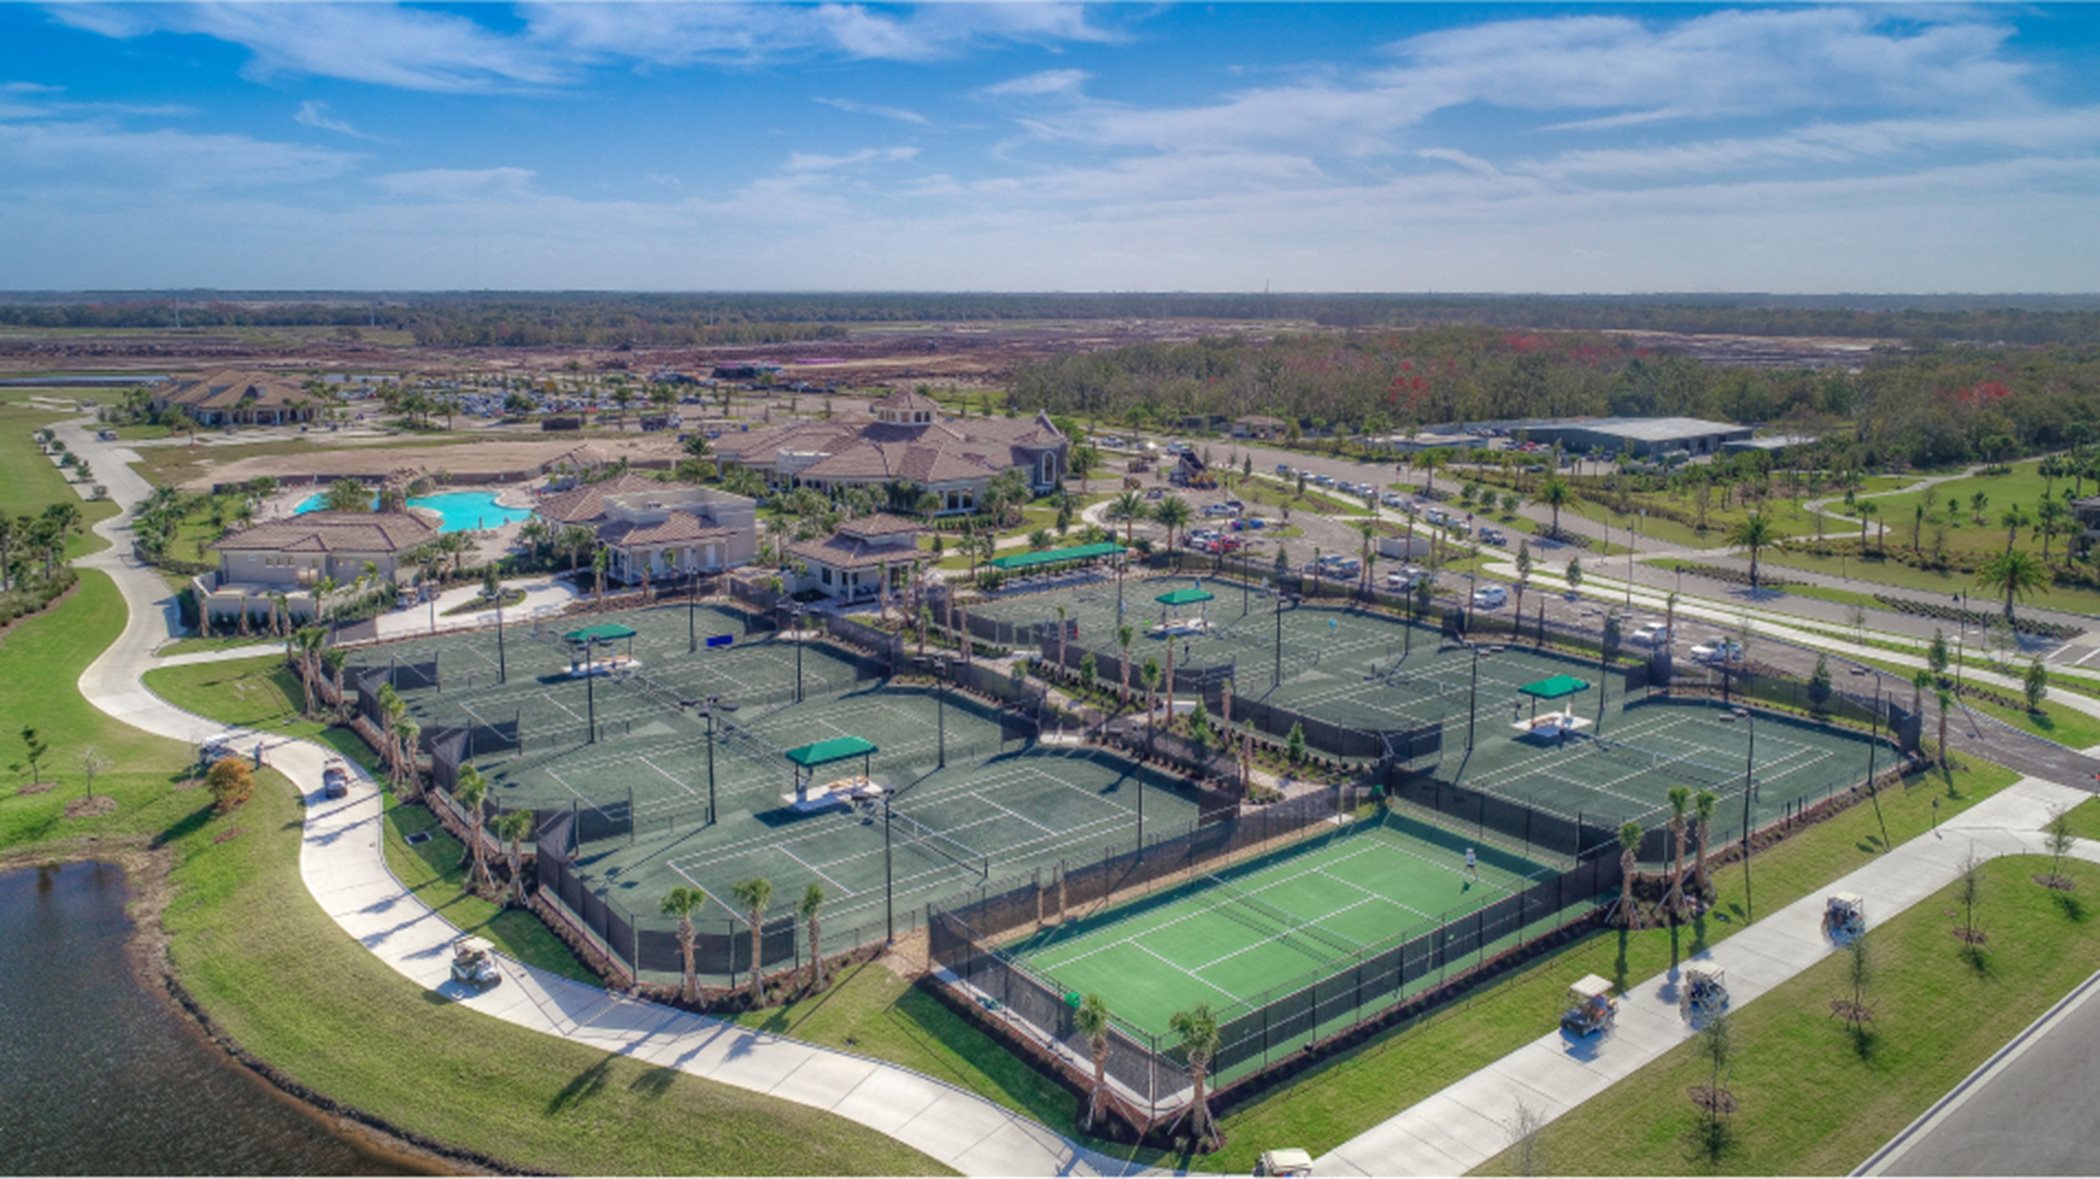 Tennis courts and Tennis pro shop